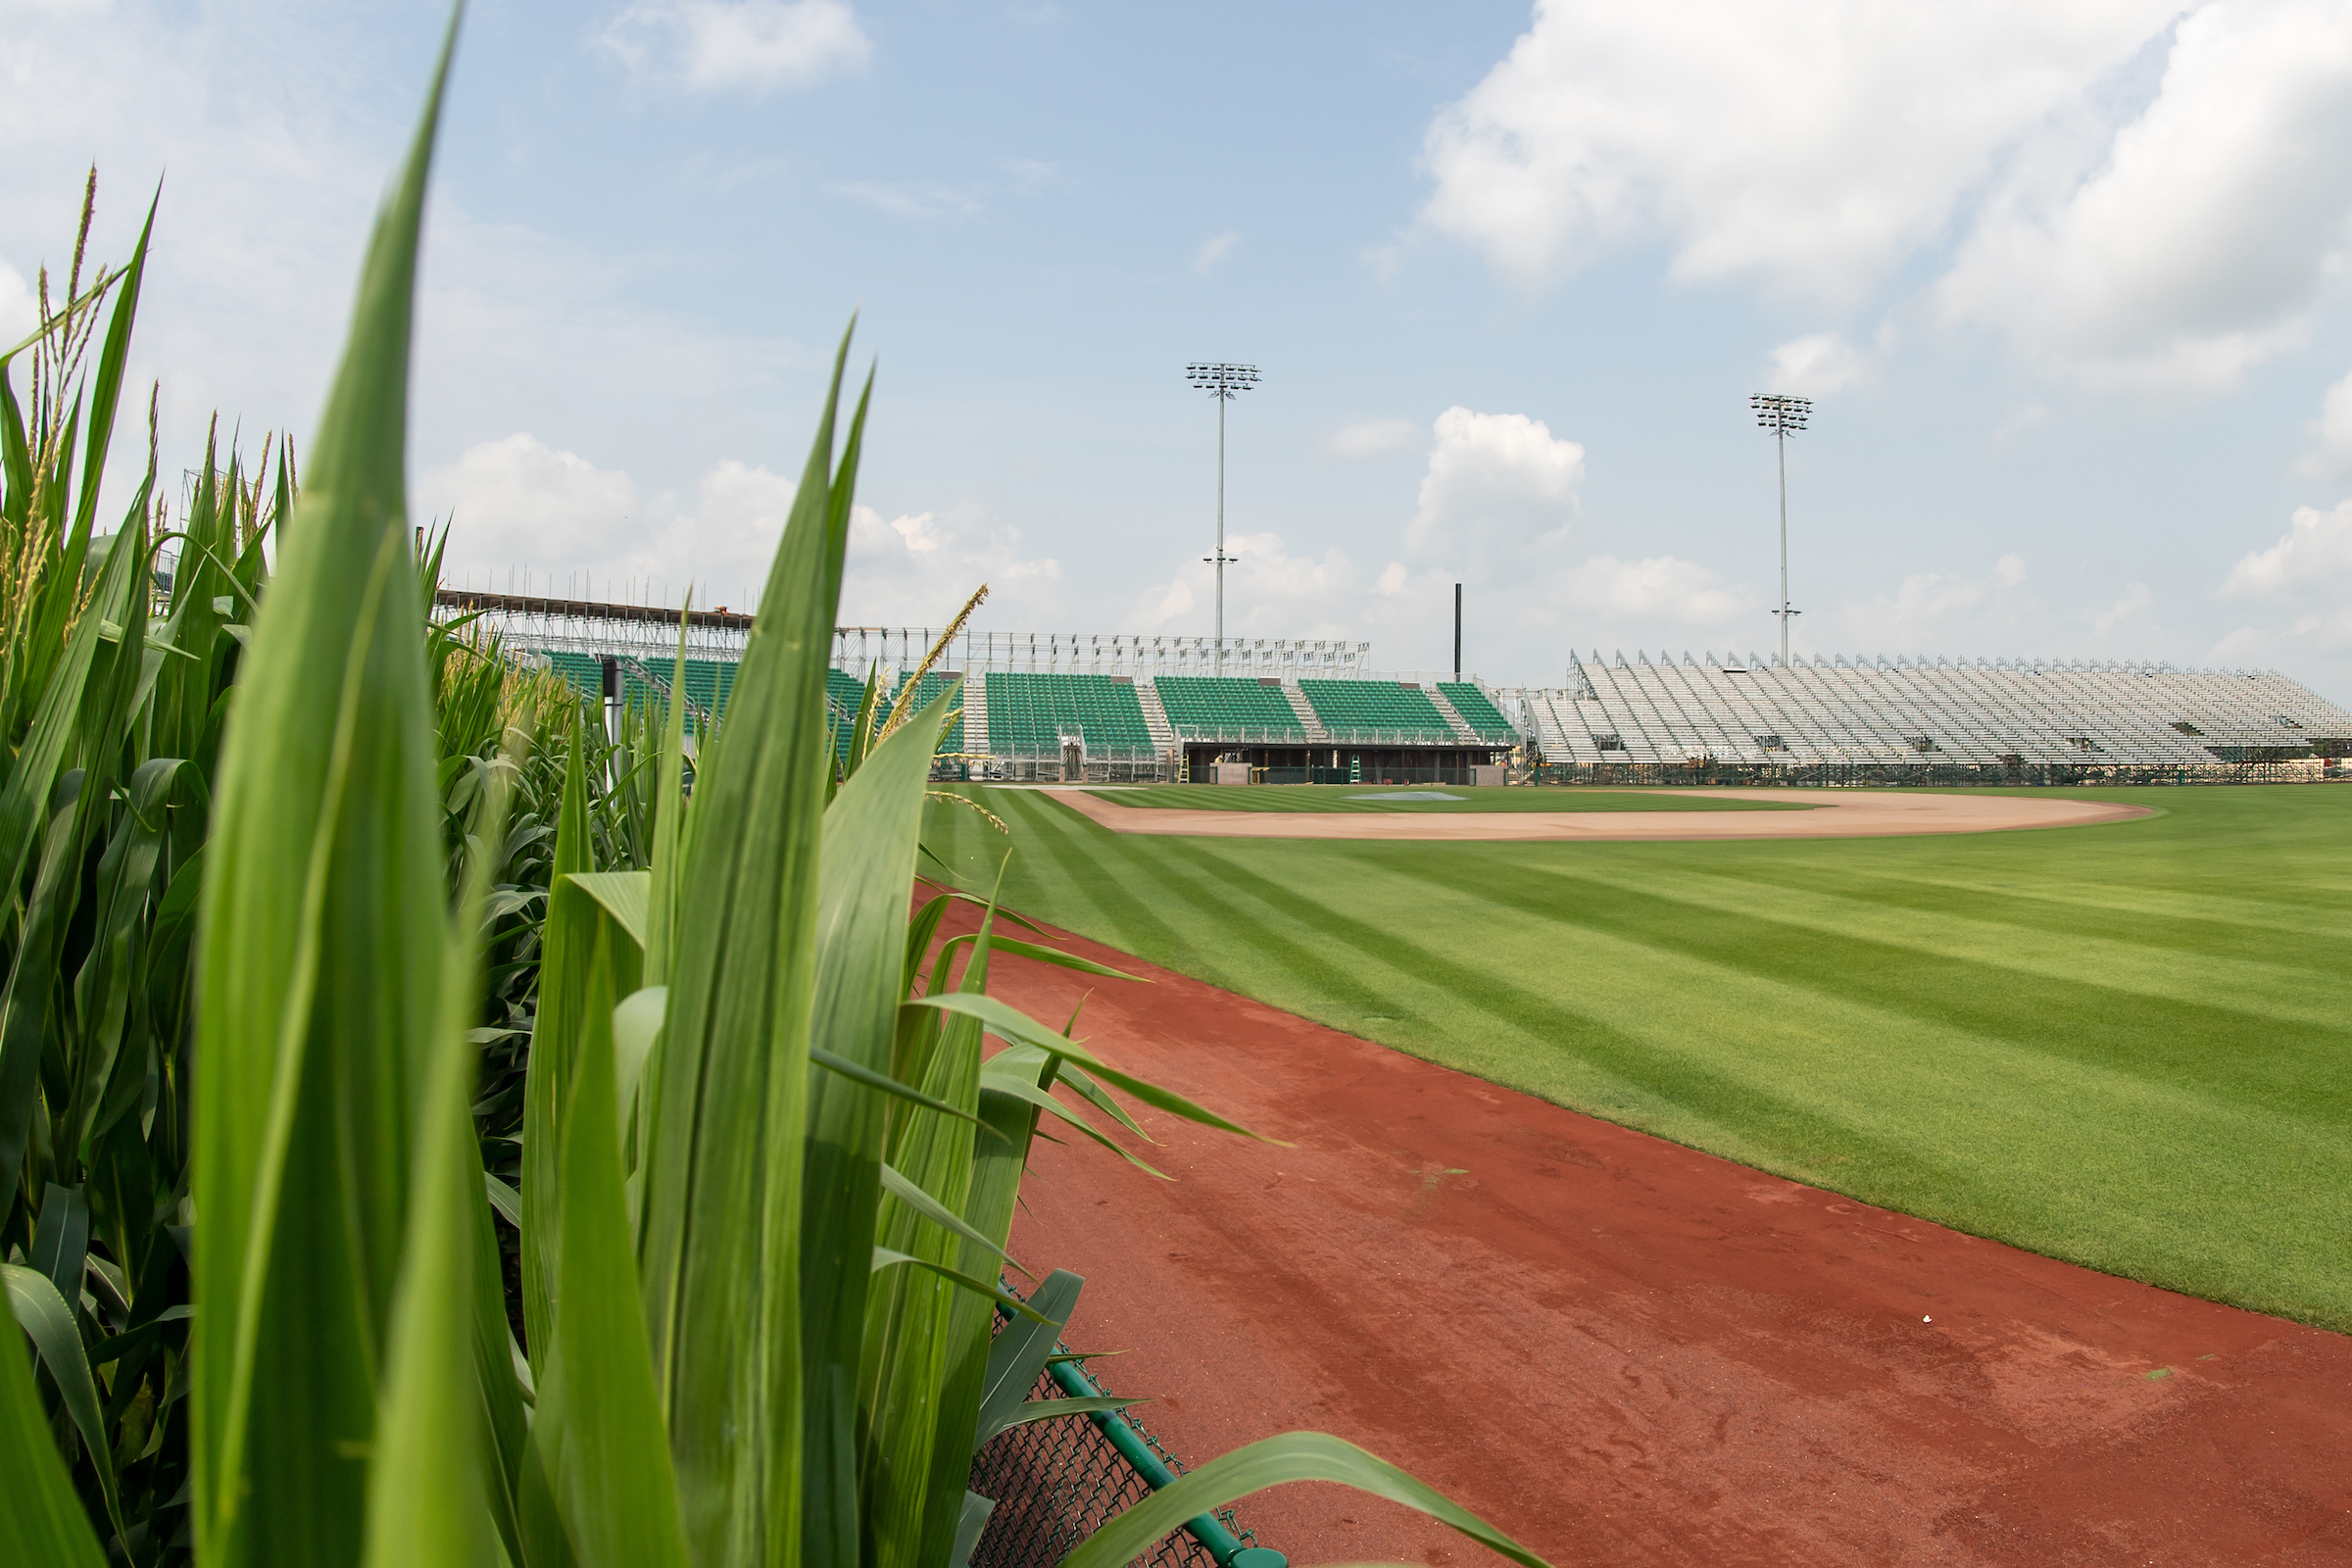 Major League Baseball got it right with Field of Dreams game - The